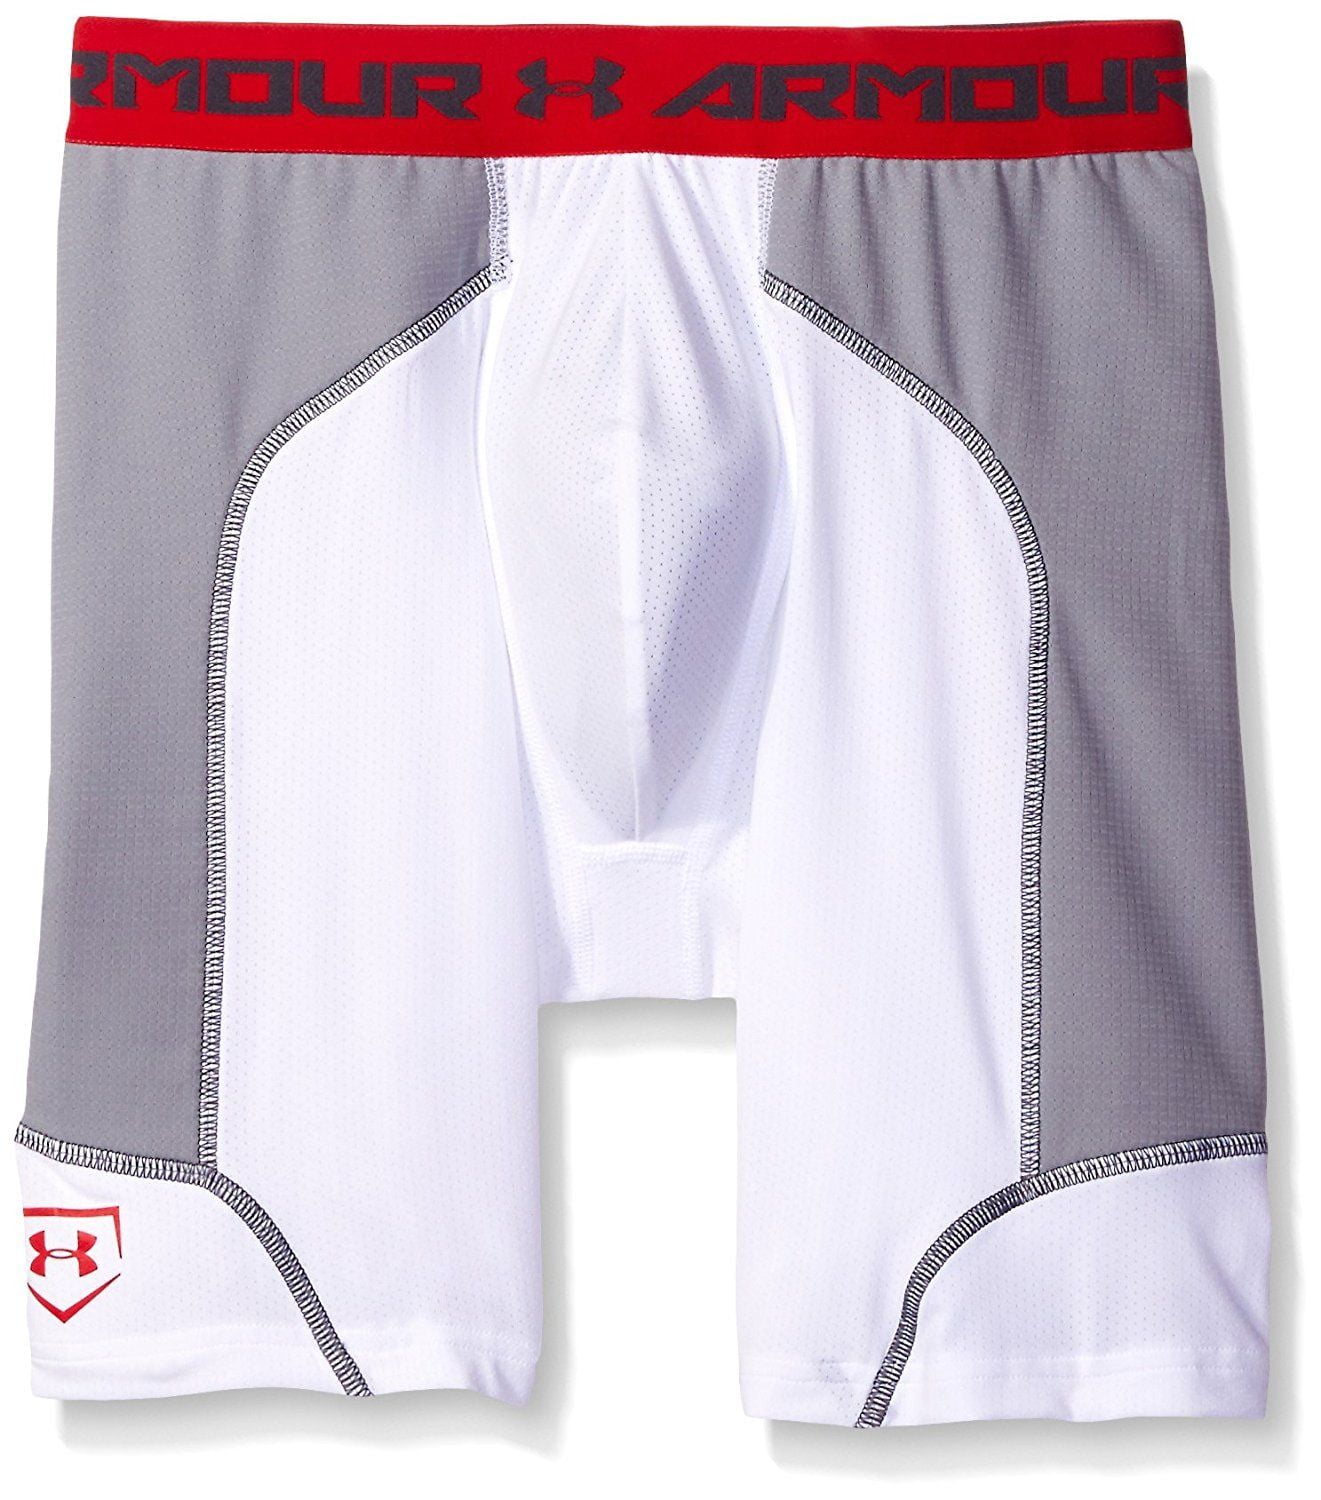 under armour youth cup underwear